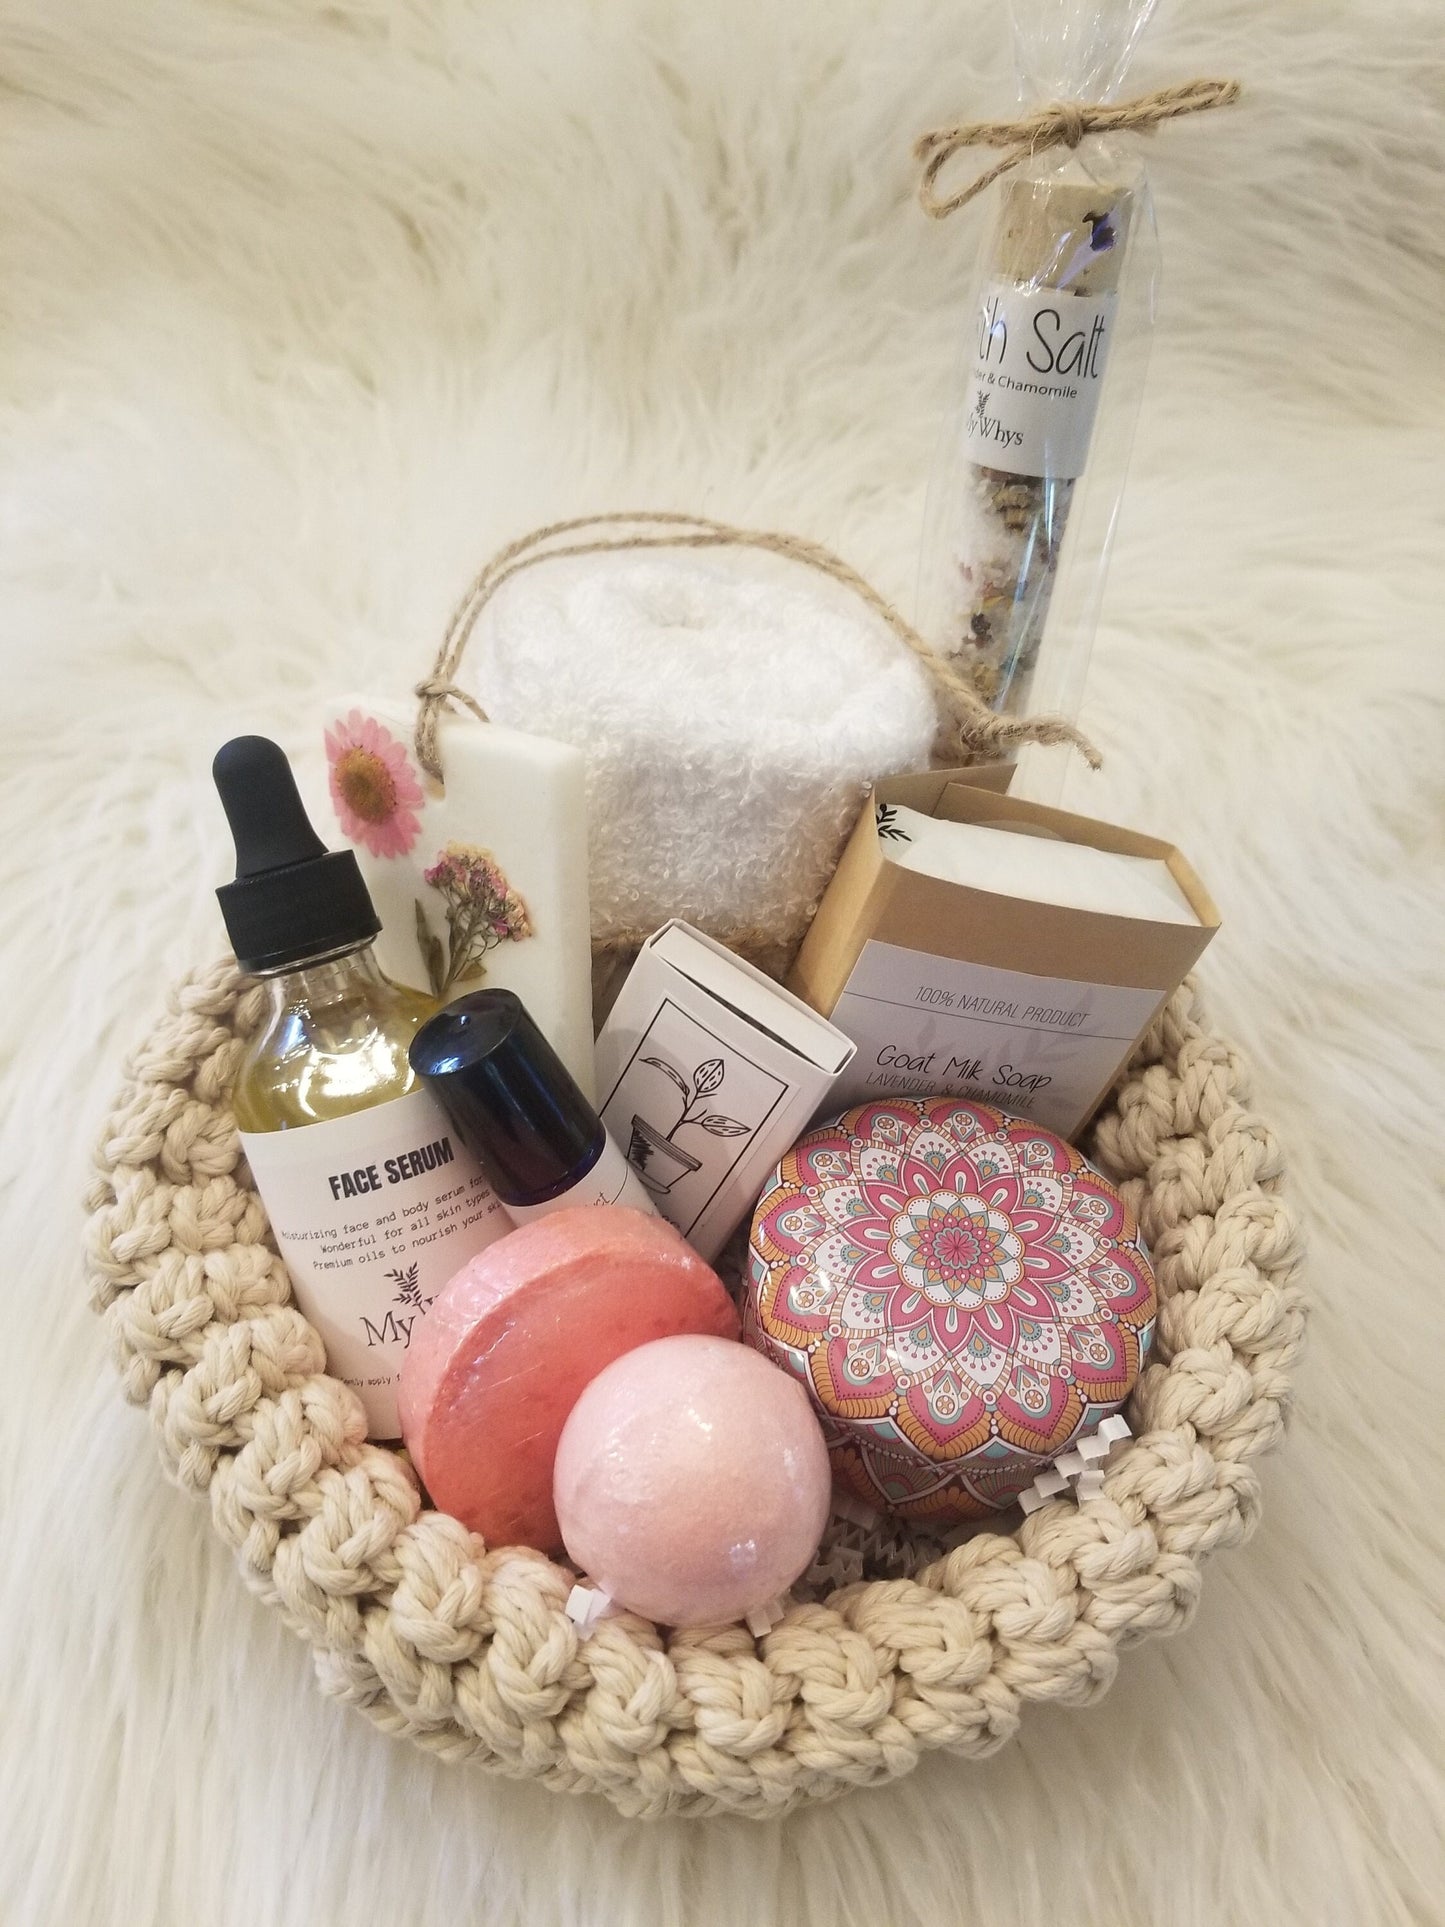 Make yourself a priority Spa gift set, send a care package